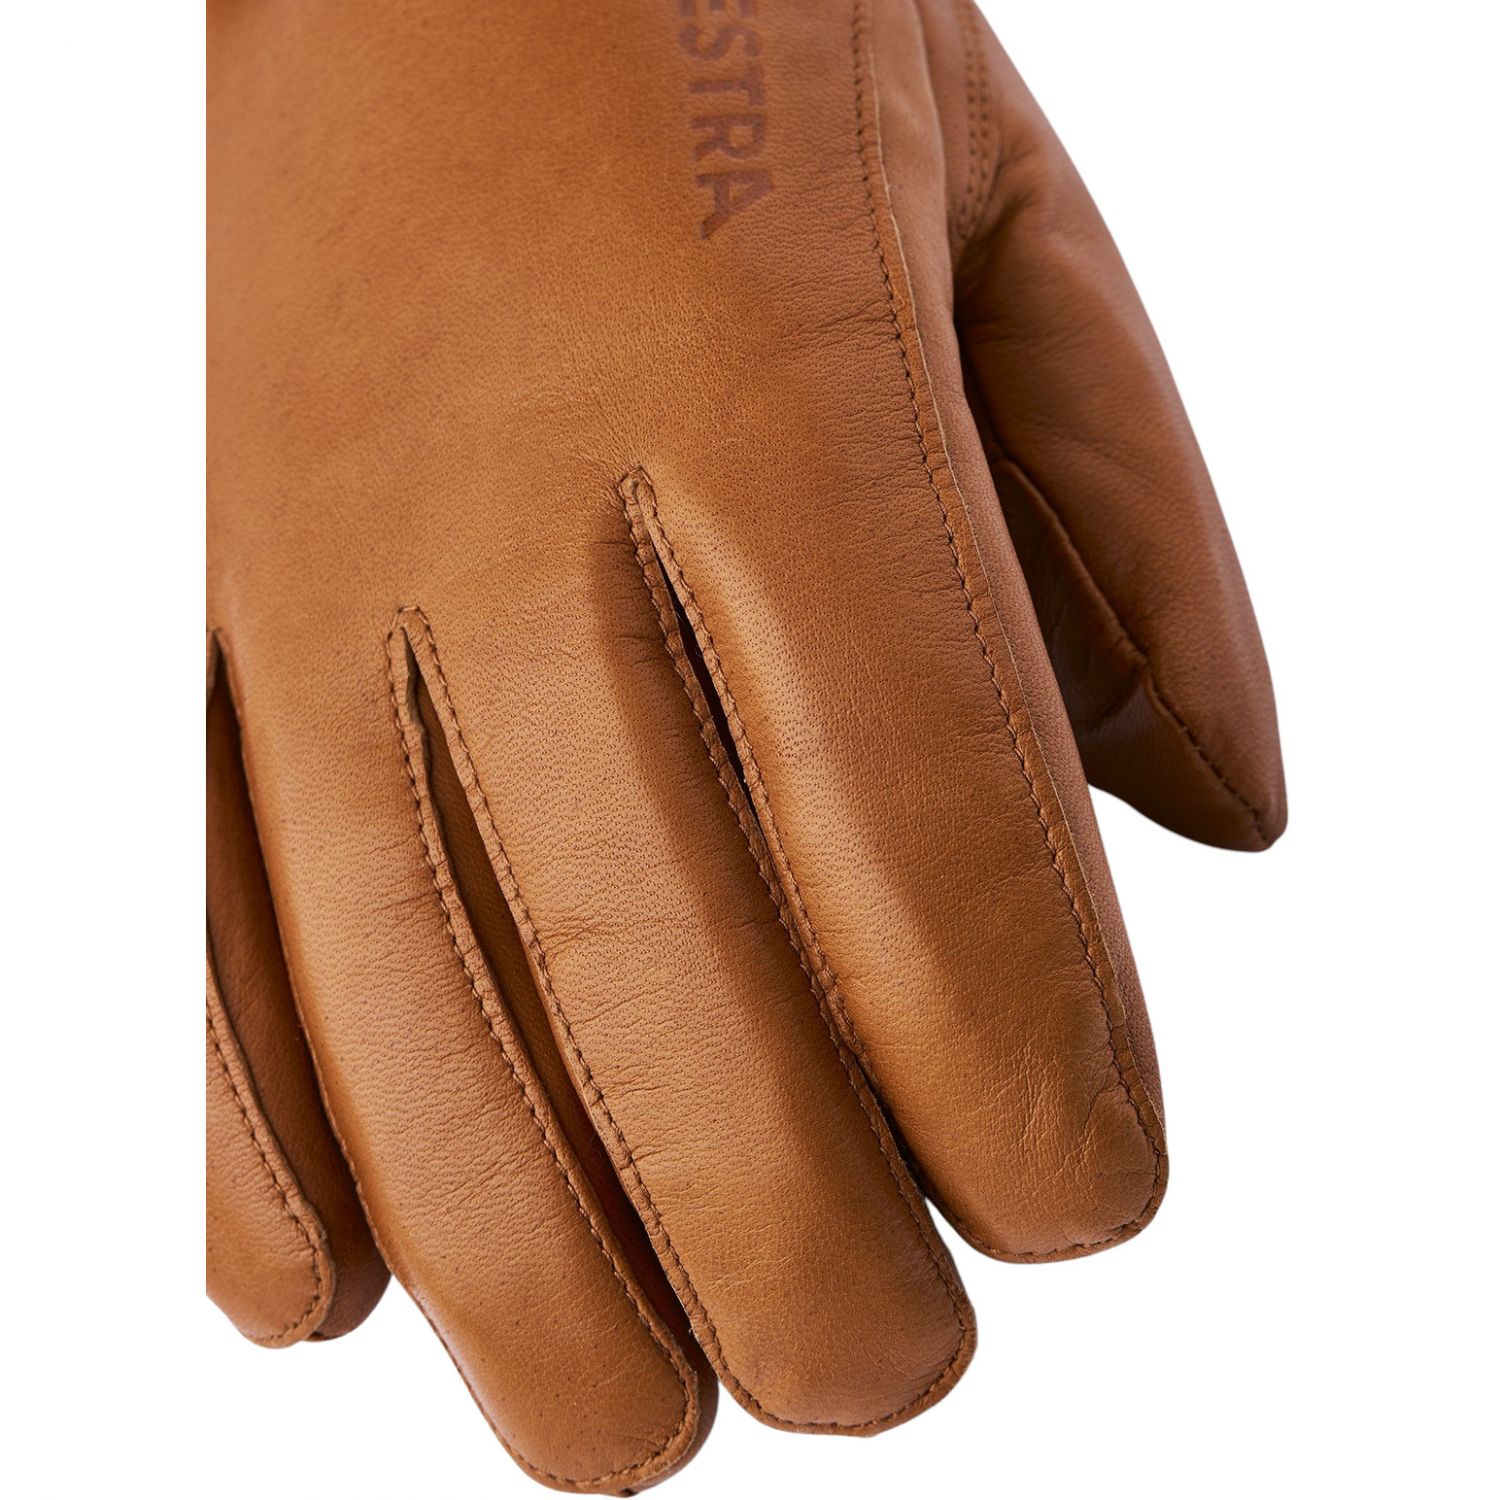 Hestra Leather Swisswool Classic, gloves, cork